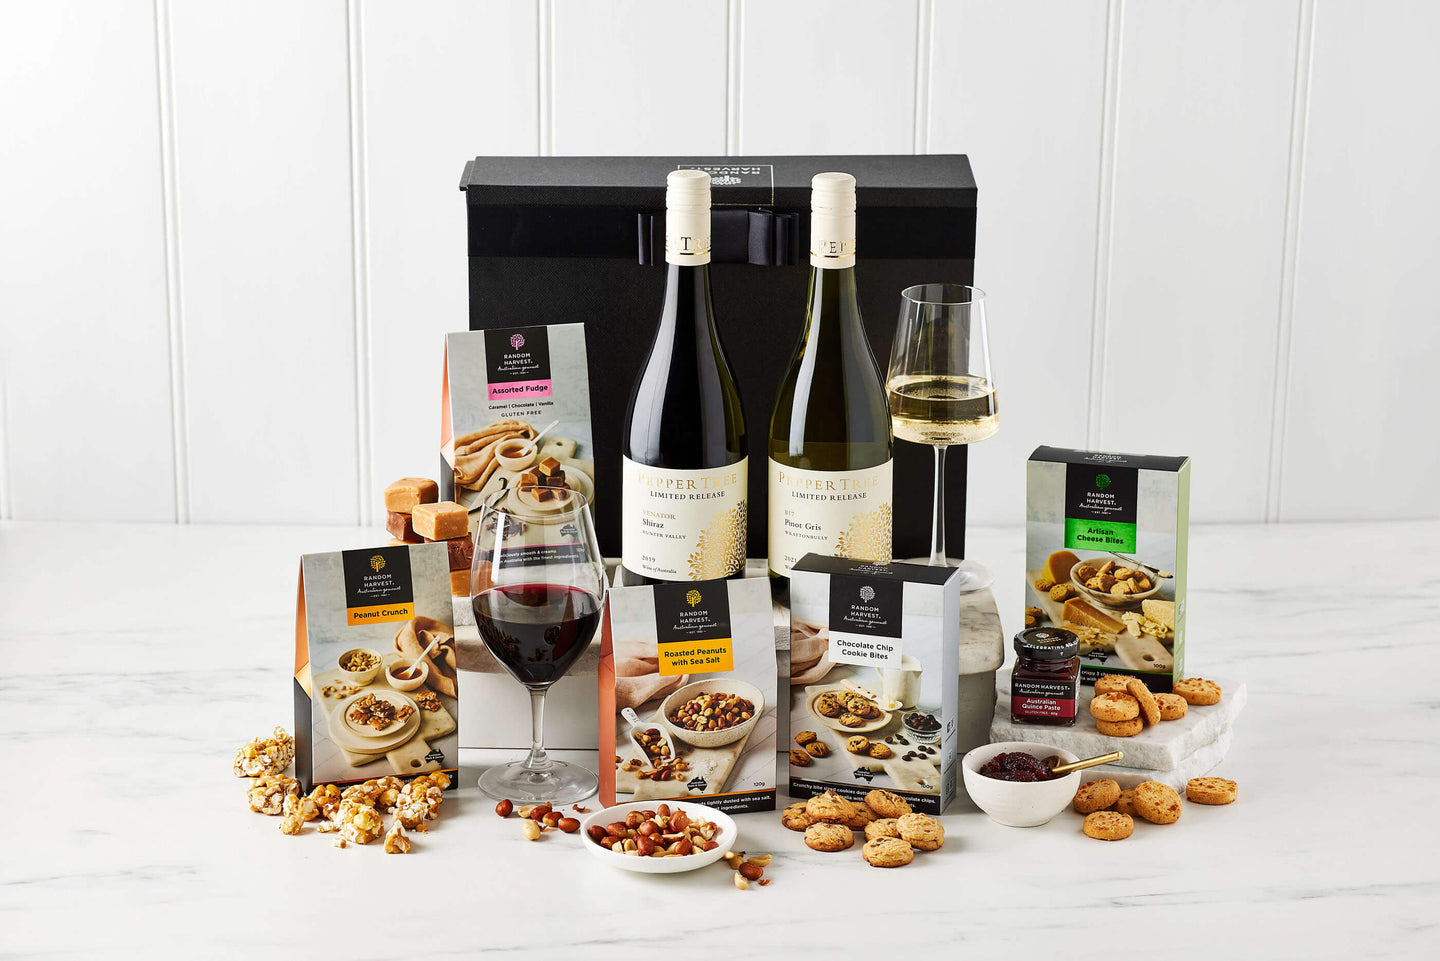 Mother's Day Hampers, Luxury mother's day gift hampers with Australian made gourmet gifts from Random Harvest